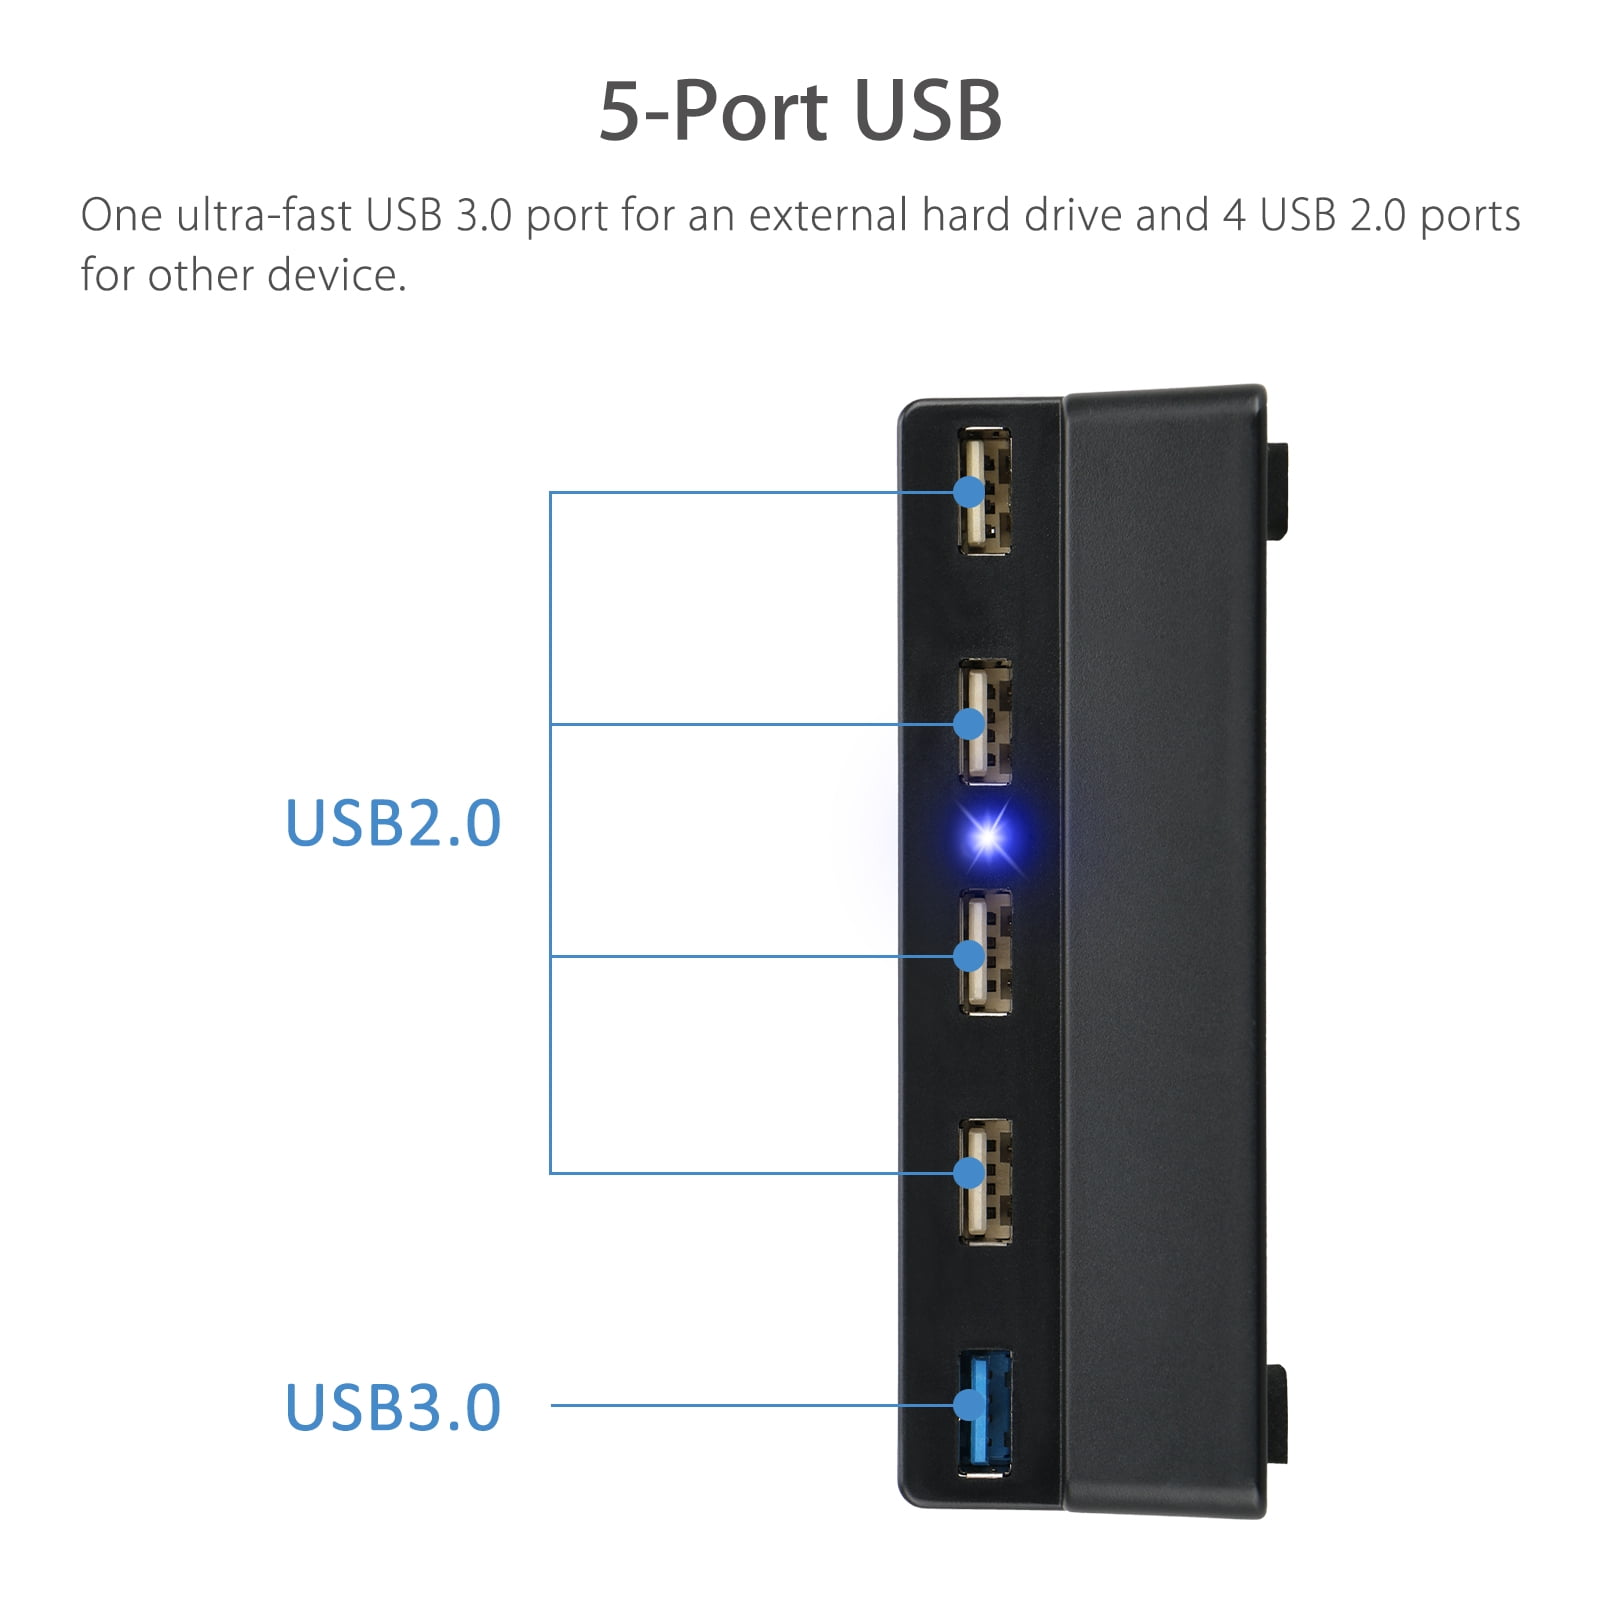 PS5 USB Hub PS4 USB Splitter, 4-Port USB 2.0 Hub USB Expander Adapter  Extension for Playstation 5/4/3, Xbox One/360, Xbox Series, Switch, PC,  Tablet, Mac, Mouse, Keyboard with USB Station 